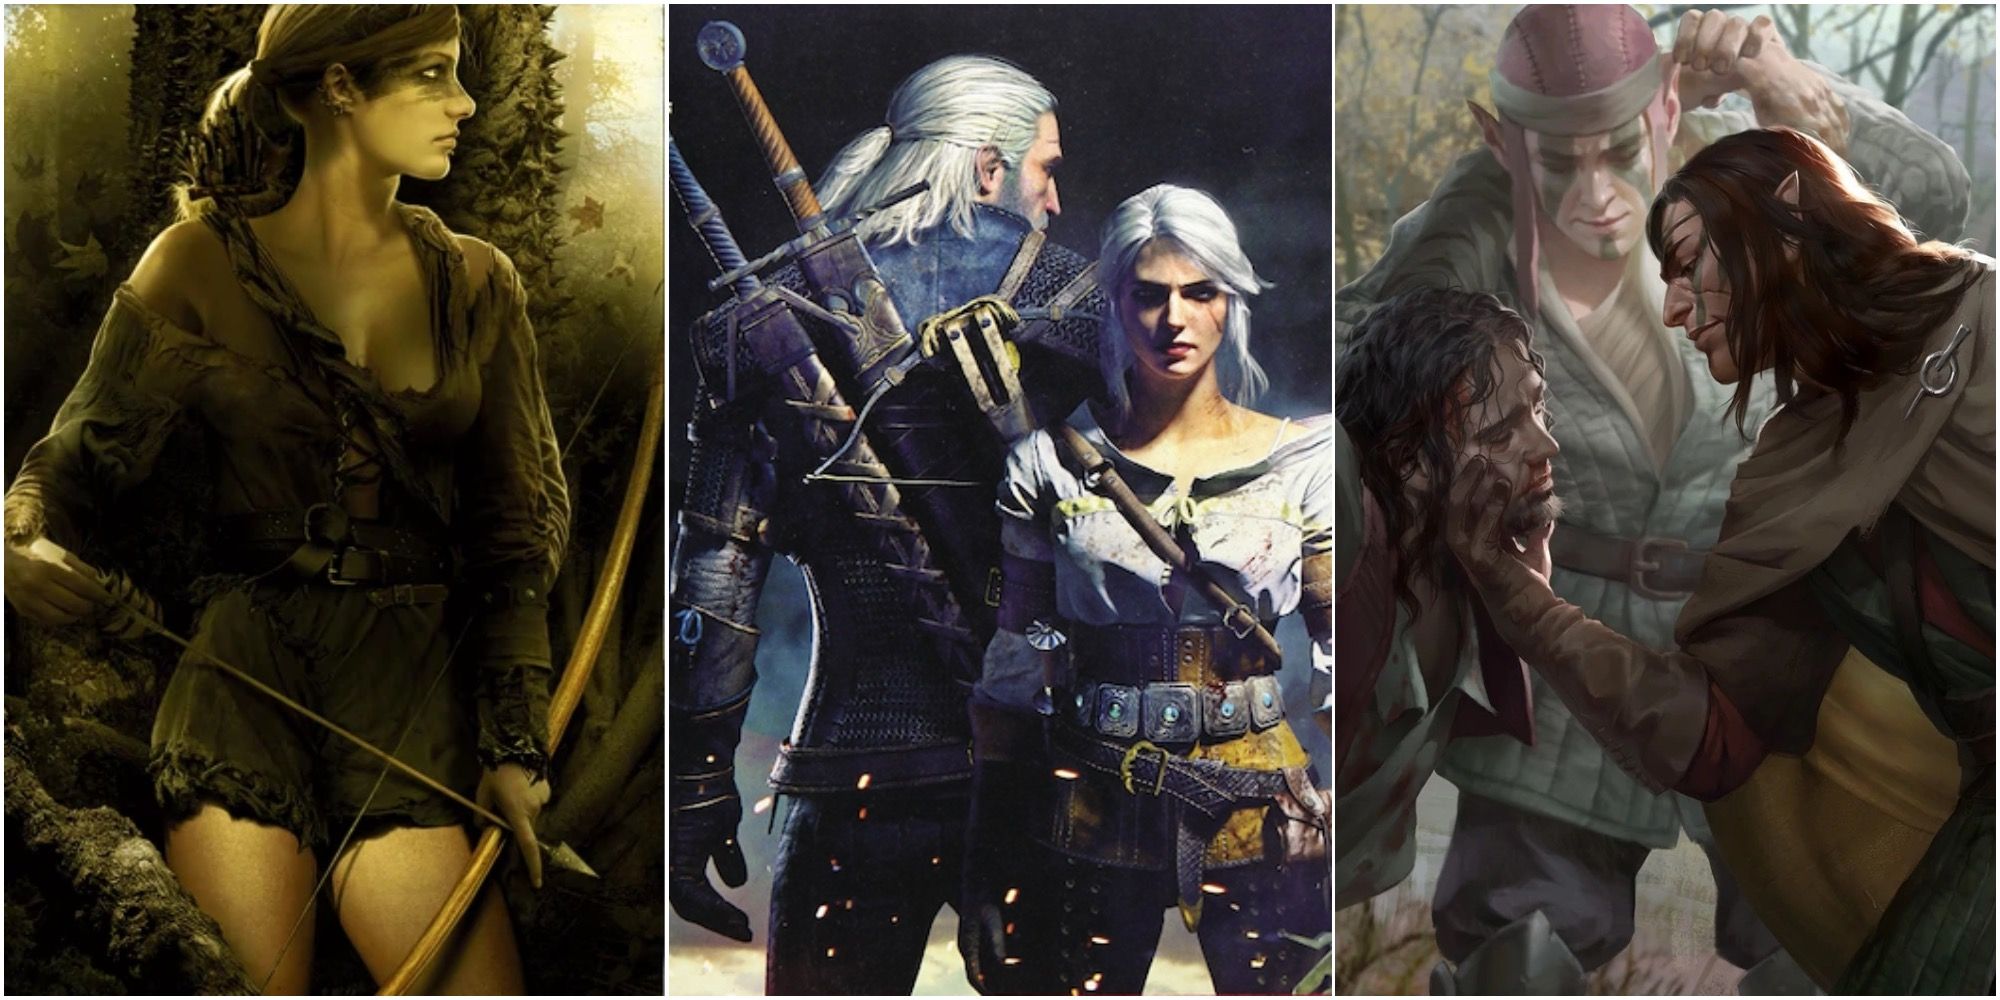 Collage Of The Witcher Characters Milva, Geralt And Ciri